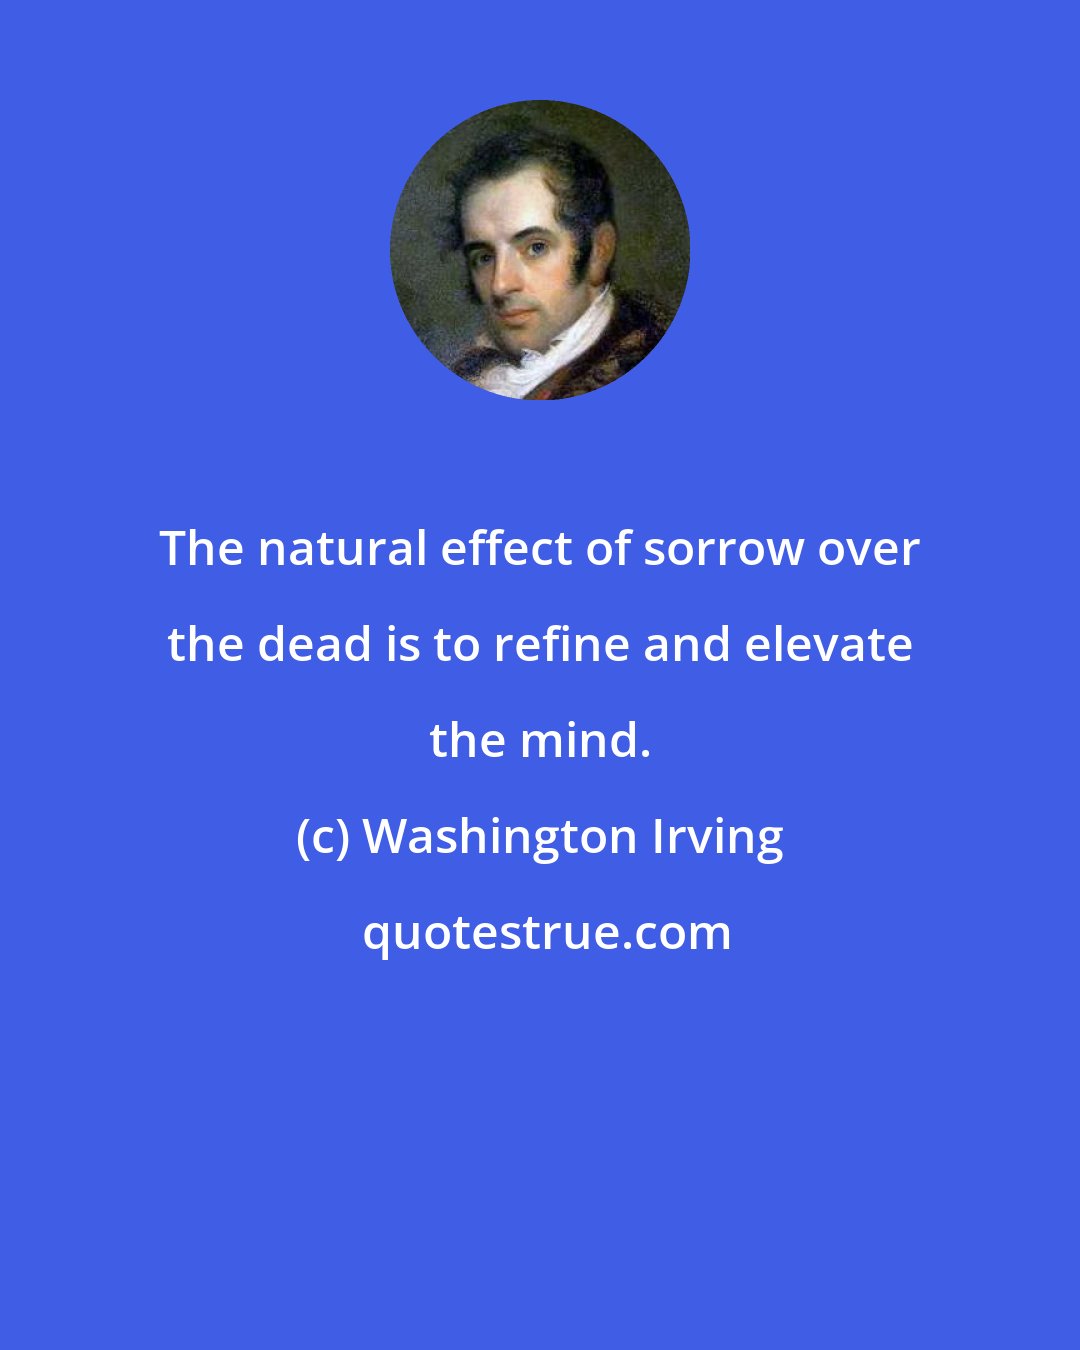 Washington Irving: The natural effect of sorrow over the dead is to refine and elevate the mind.